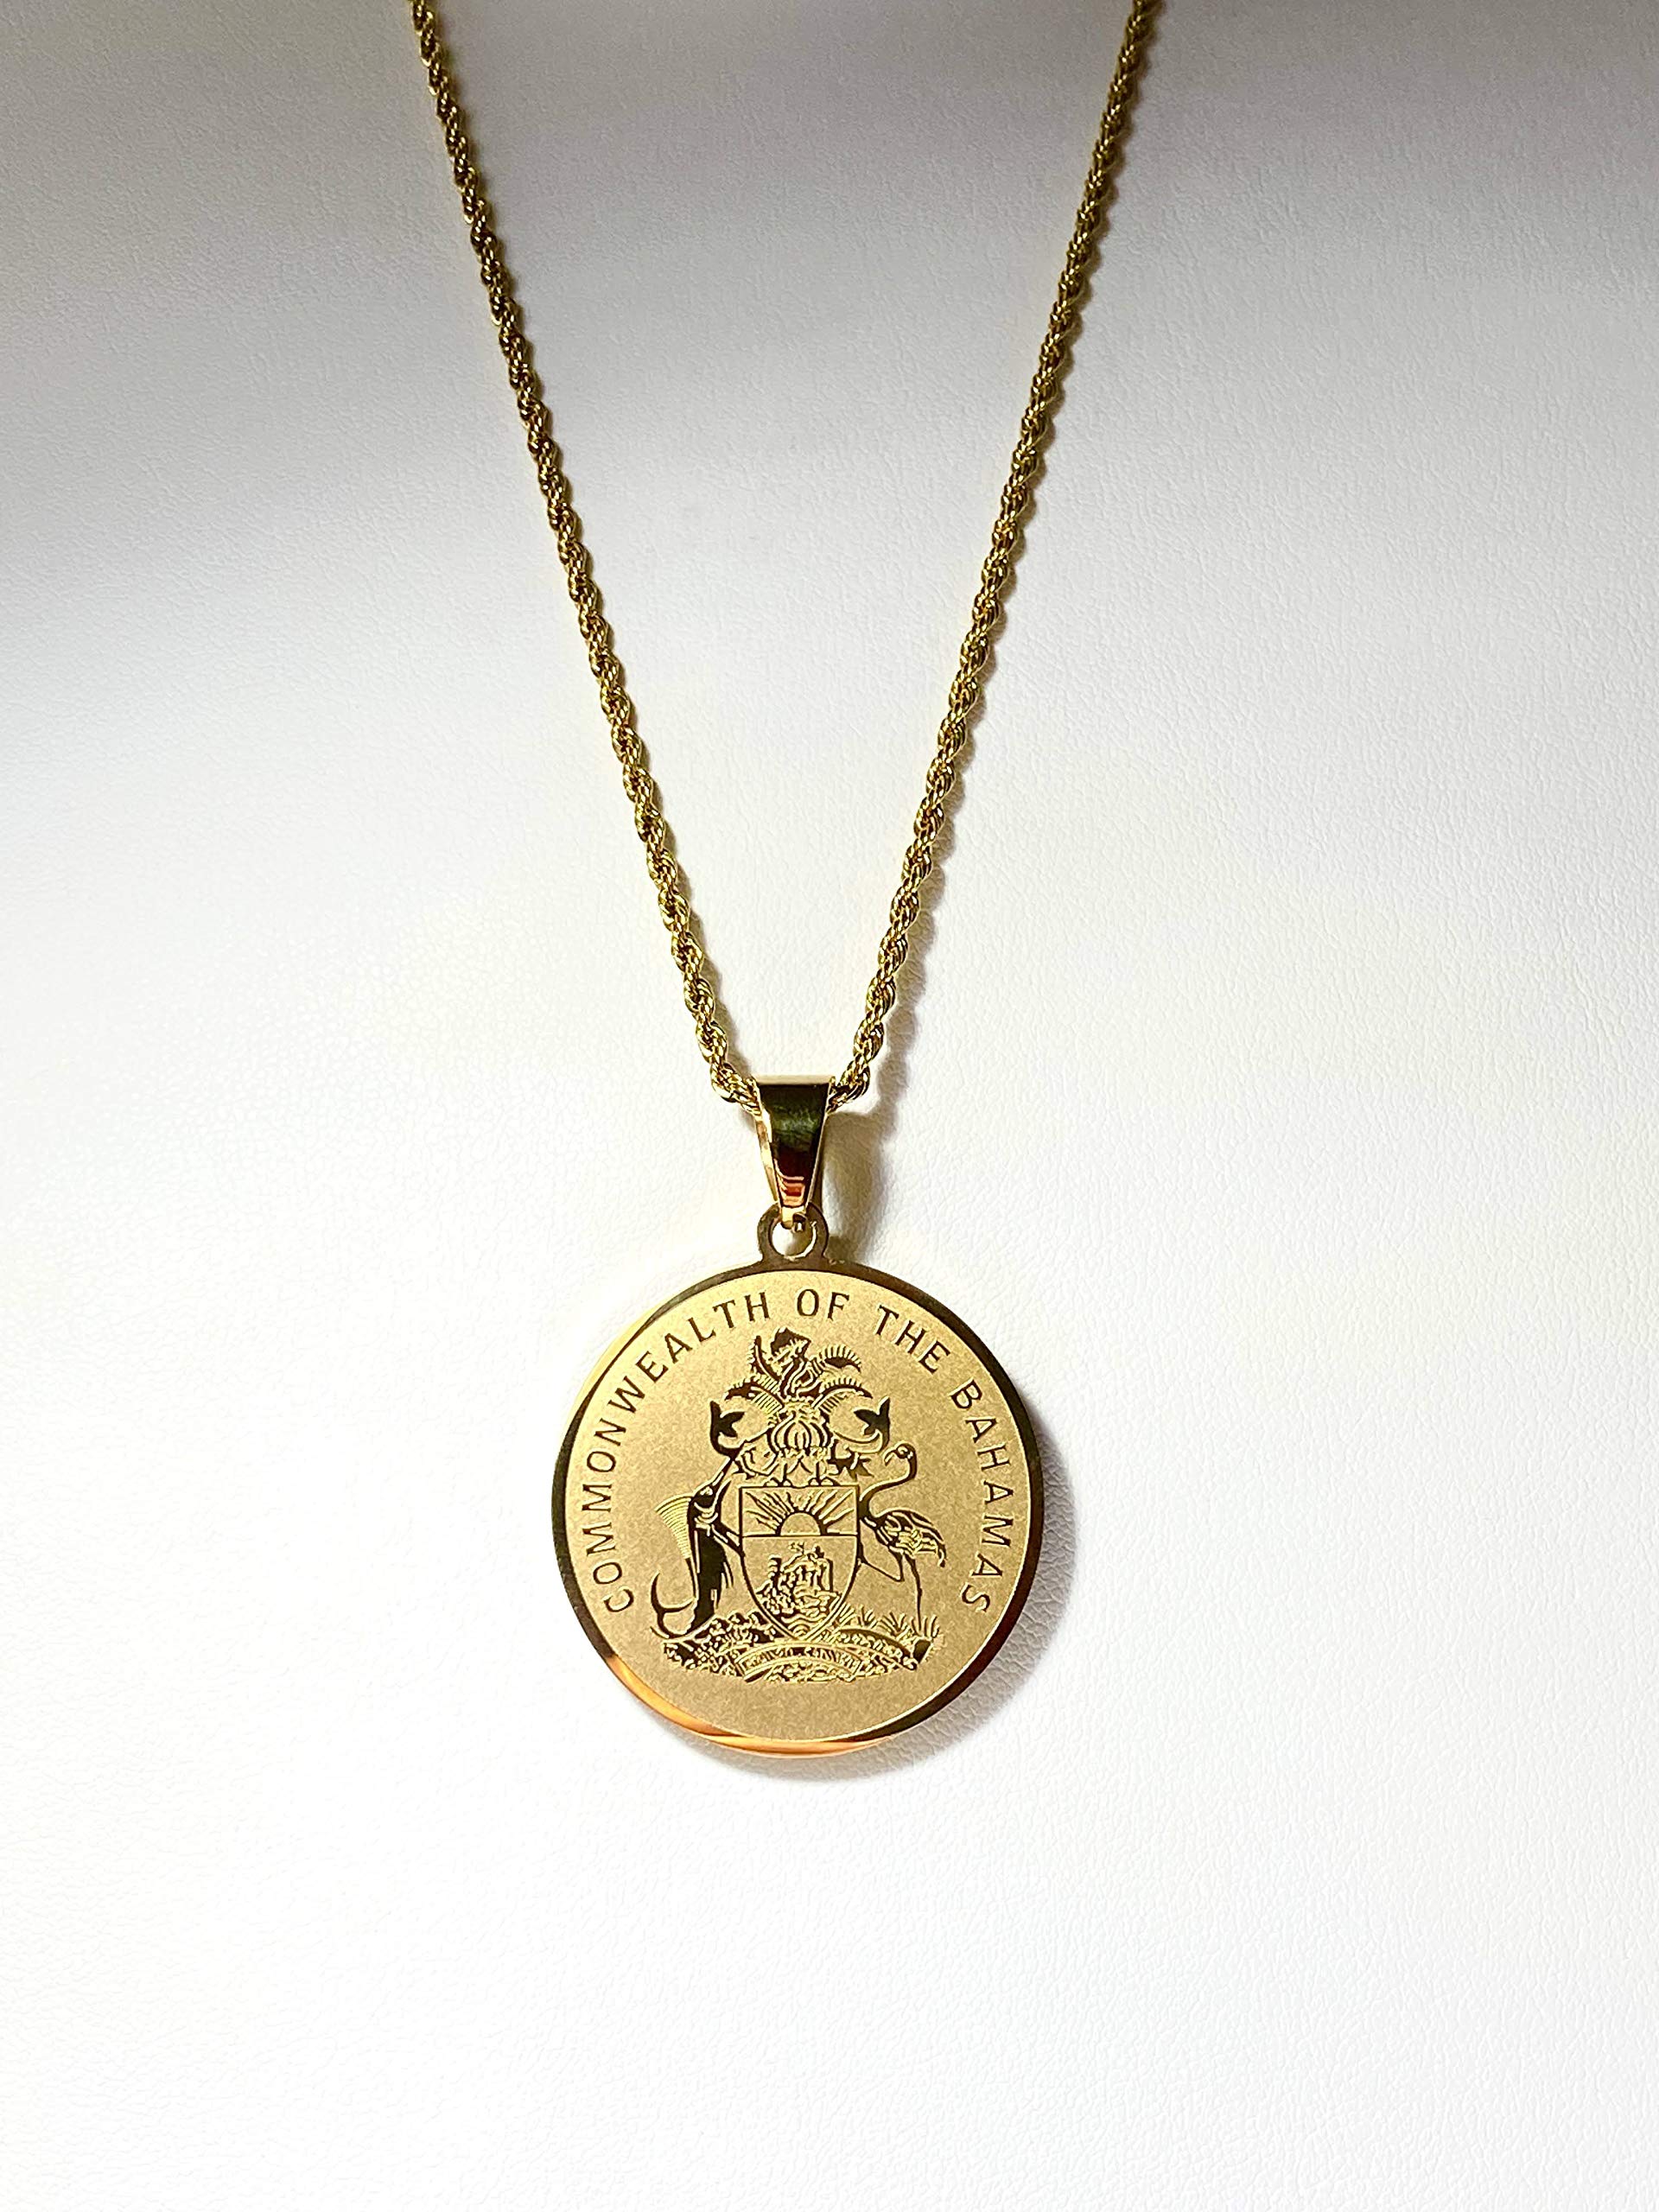 Men Women 925 Italy 14k Gold Finish Round Bahamas Coin Common Wealth Of Bahamas Peso money Gold Coin Pendant Stainless Steel Real 2.5 mm Rope Chain Necklace, Chain Pendant Rope Necklace